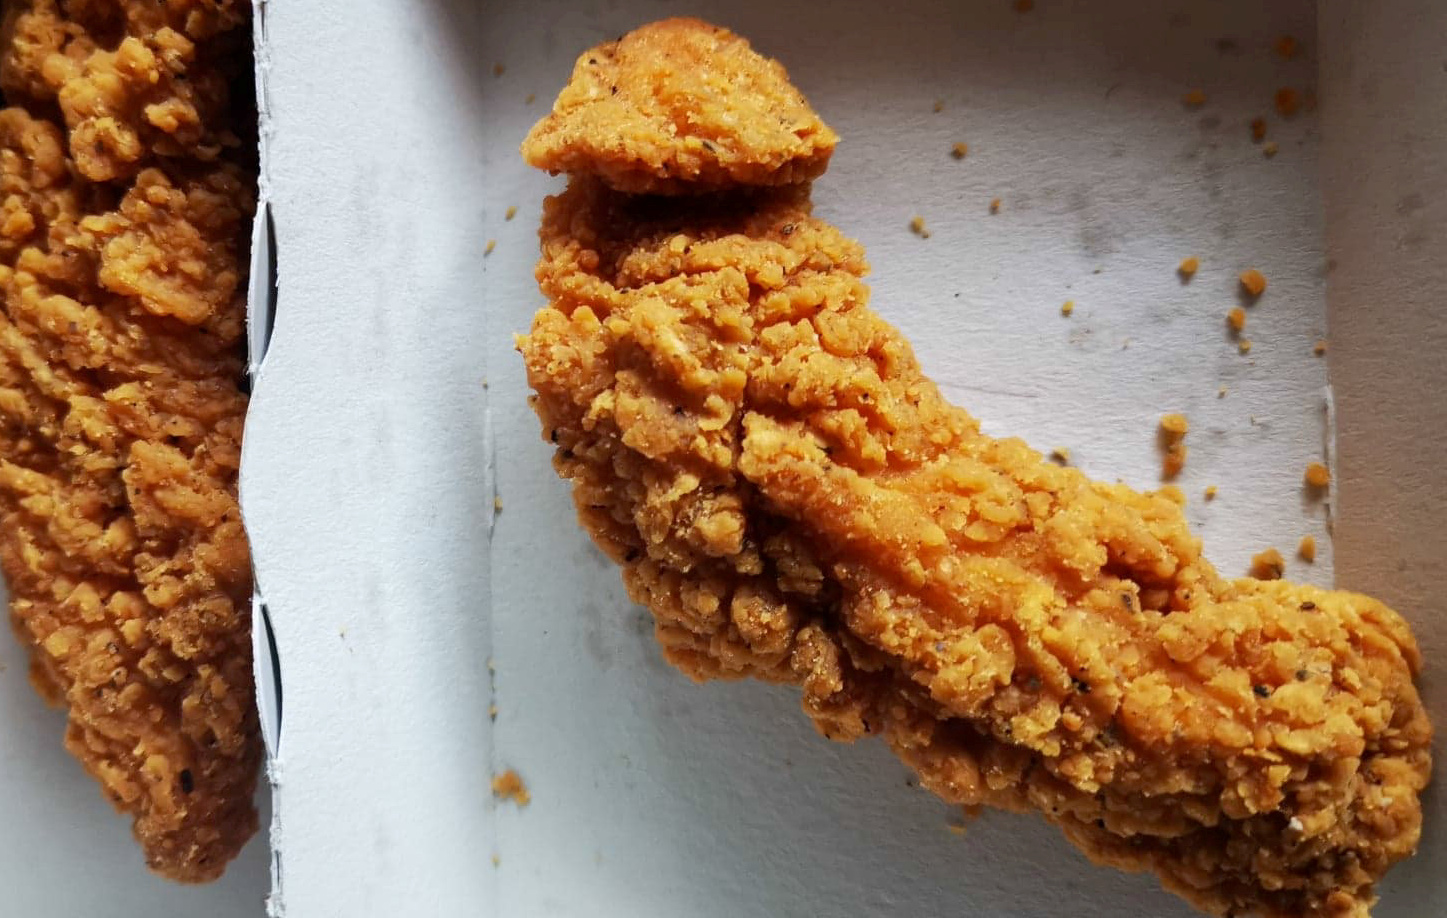 The phallus shaped chicken select found by dad Rich Greene in his McDonalds meal. See SWNS story SWOCselect. A dad was left surprised after finding a suspiciously-shaped chicken select in his McDonalds meal. Rich Greene, 47, bought his favourite the